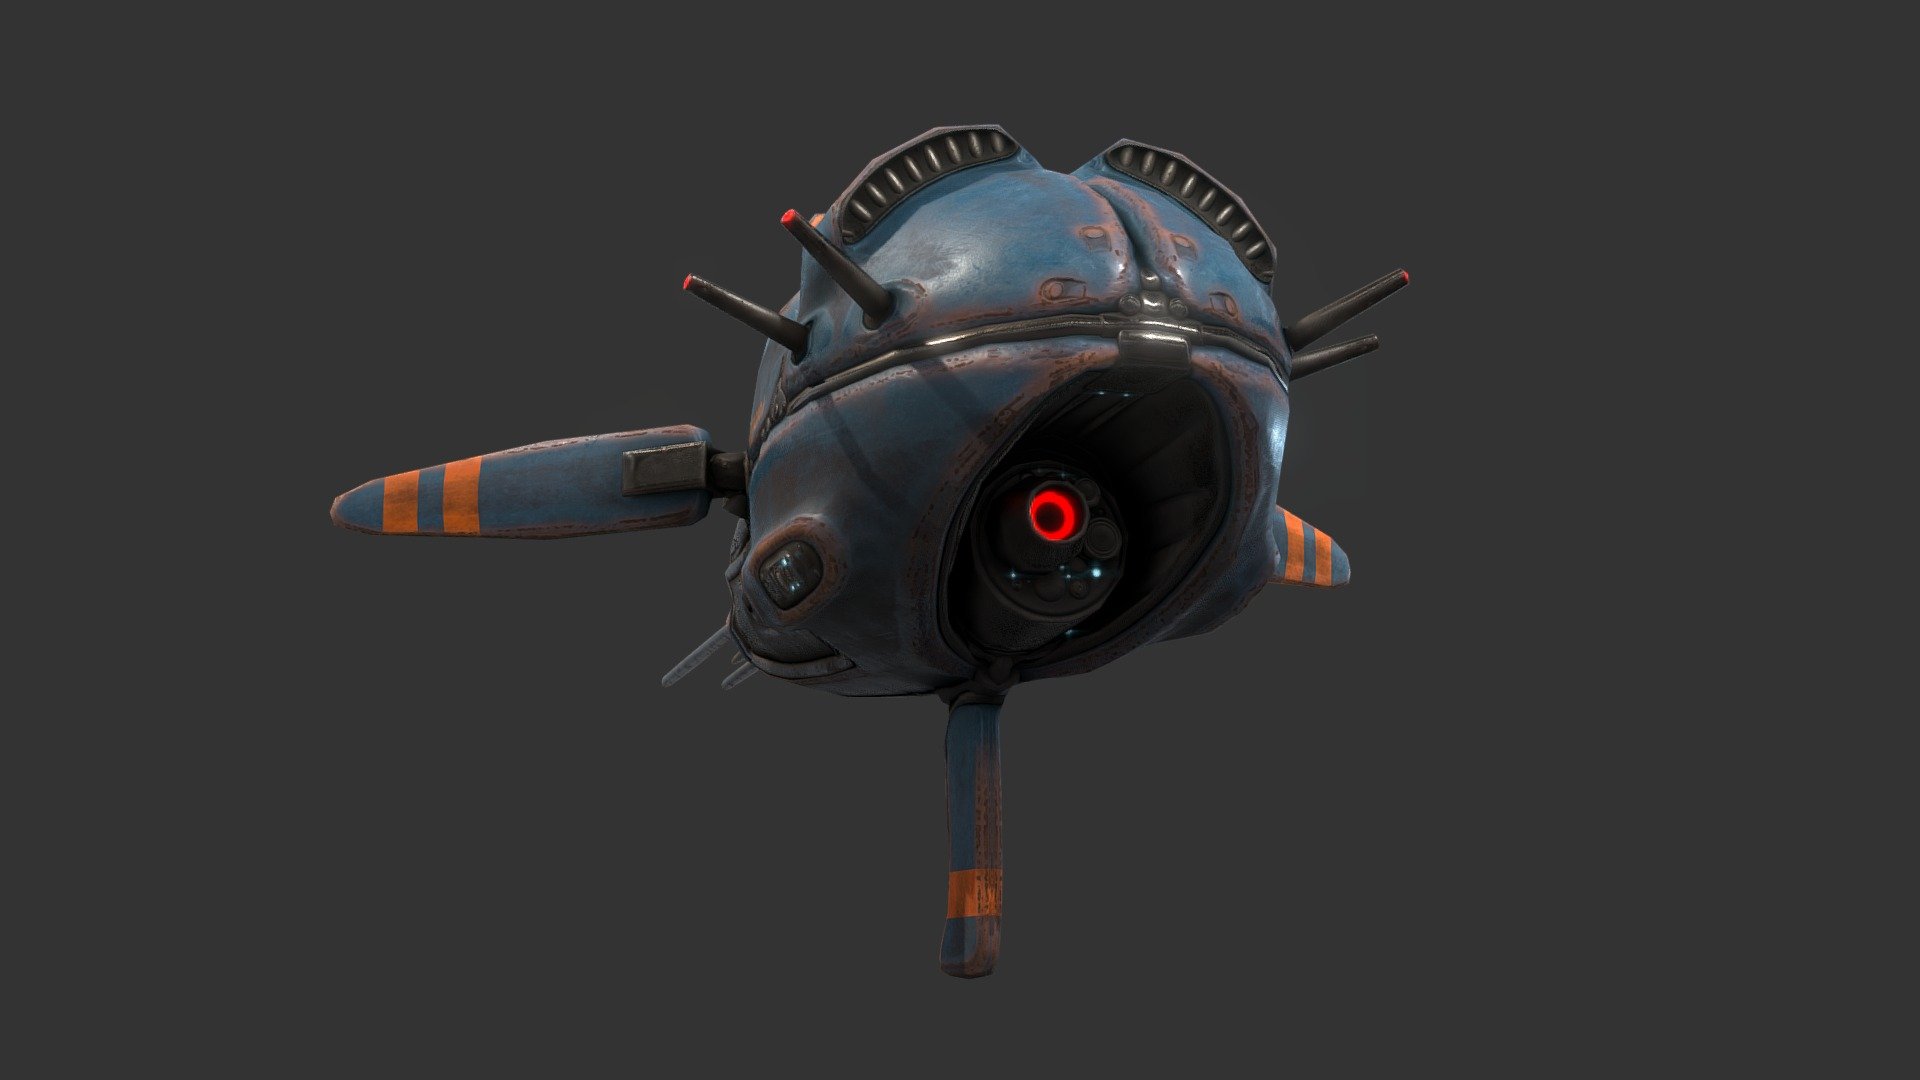 An unmanned craft from beyond the stars

Made in 3DSMax and Substance Painter

Questions? Interested in a custom model? Want me working on your project? Feel free to contact me via artstation at: https://www.artstation.com/renafox3d - Alien Probe - Download Free 3D model by Renafox (@kryik1023) 3d model